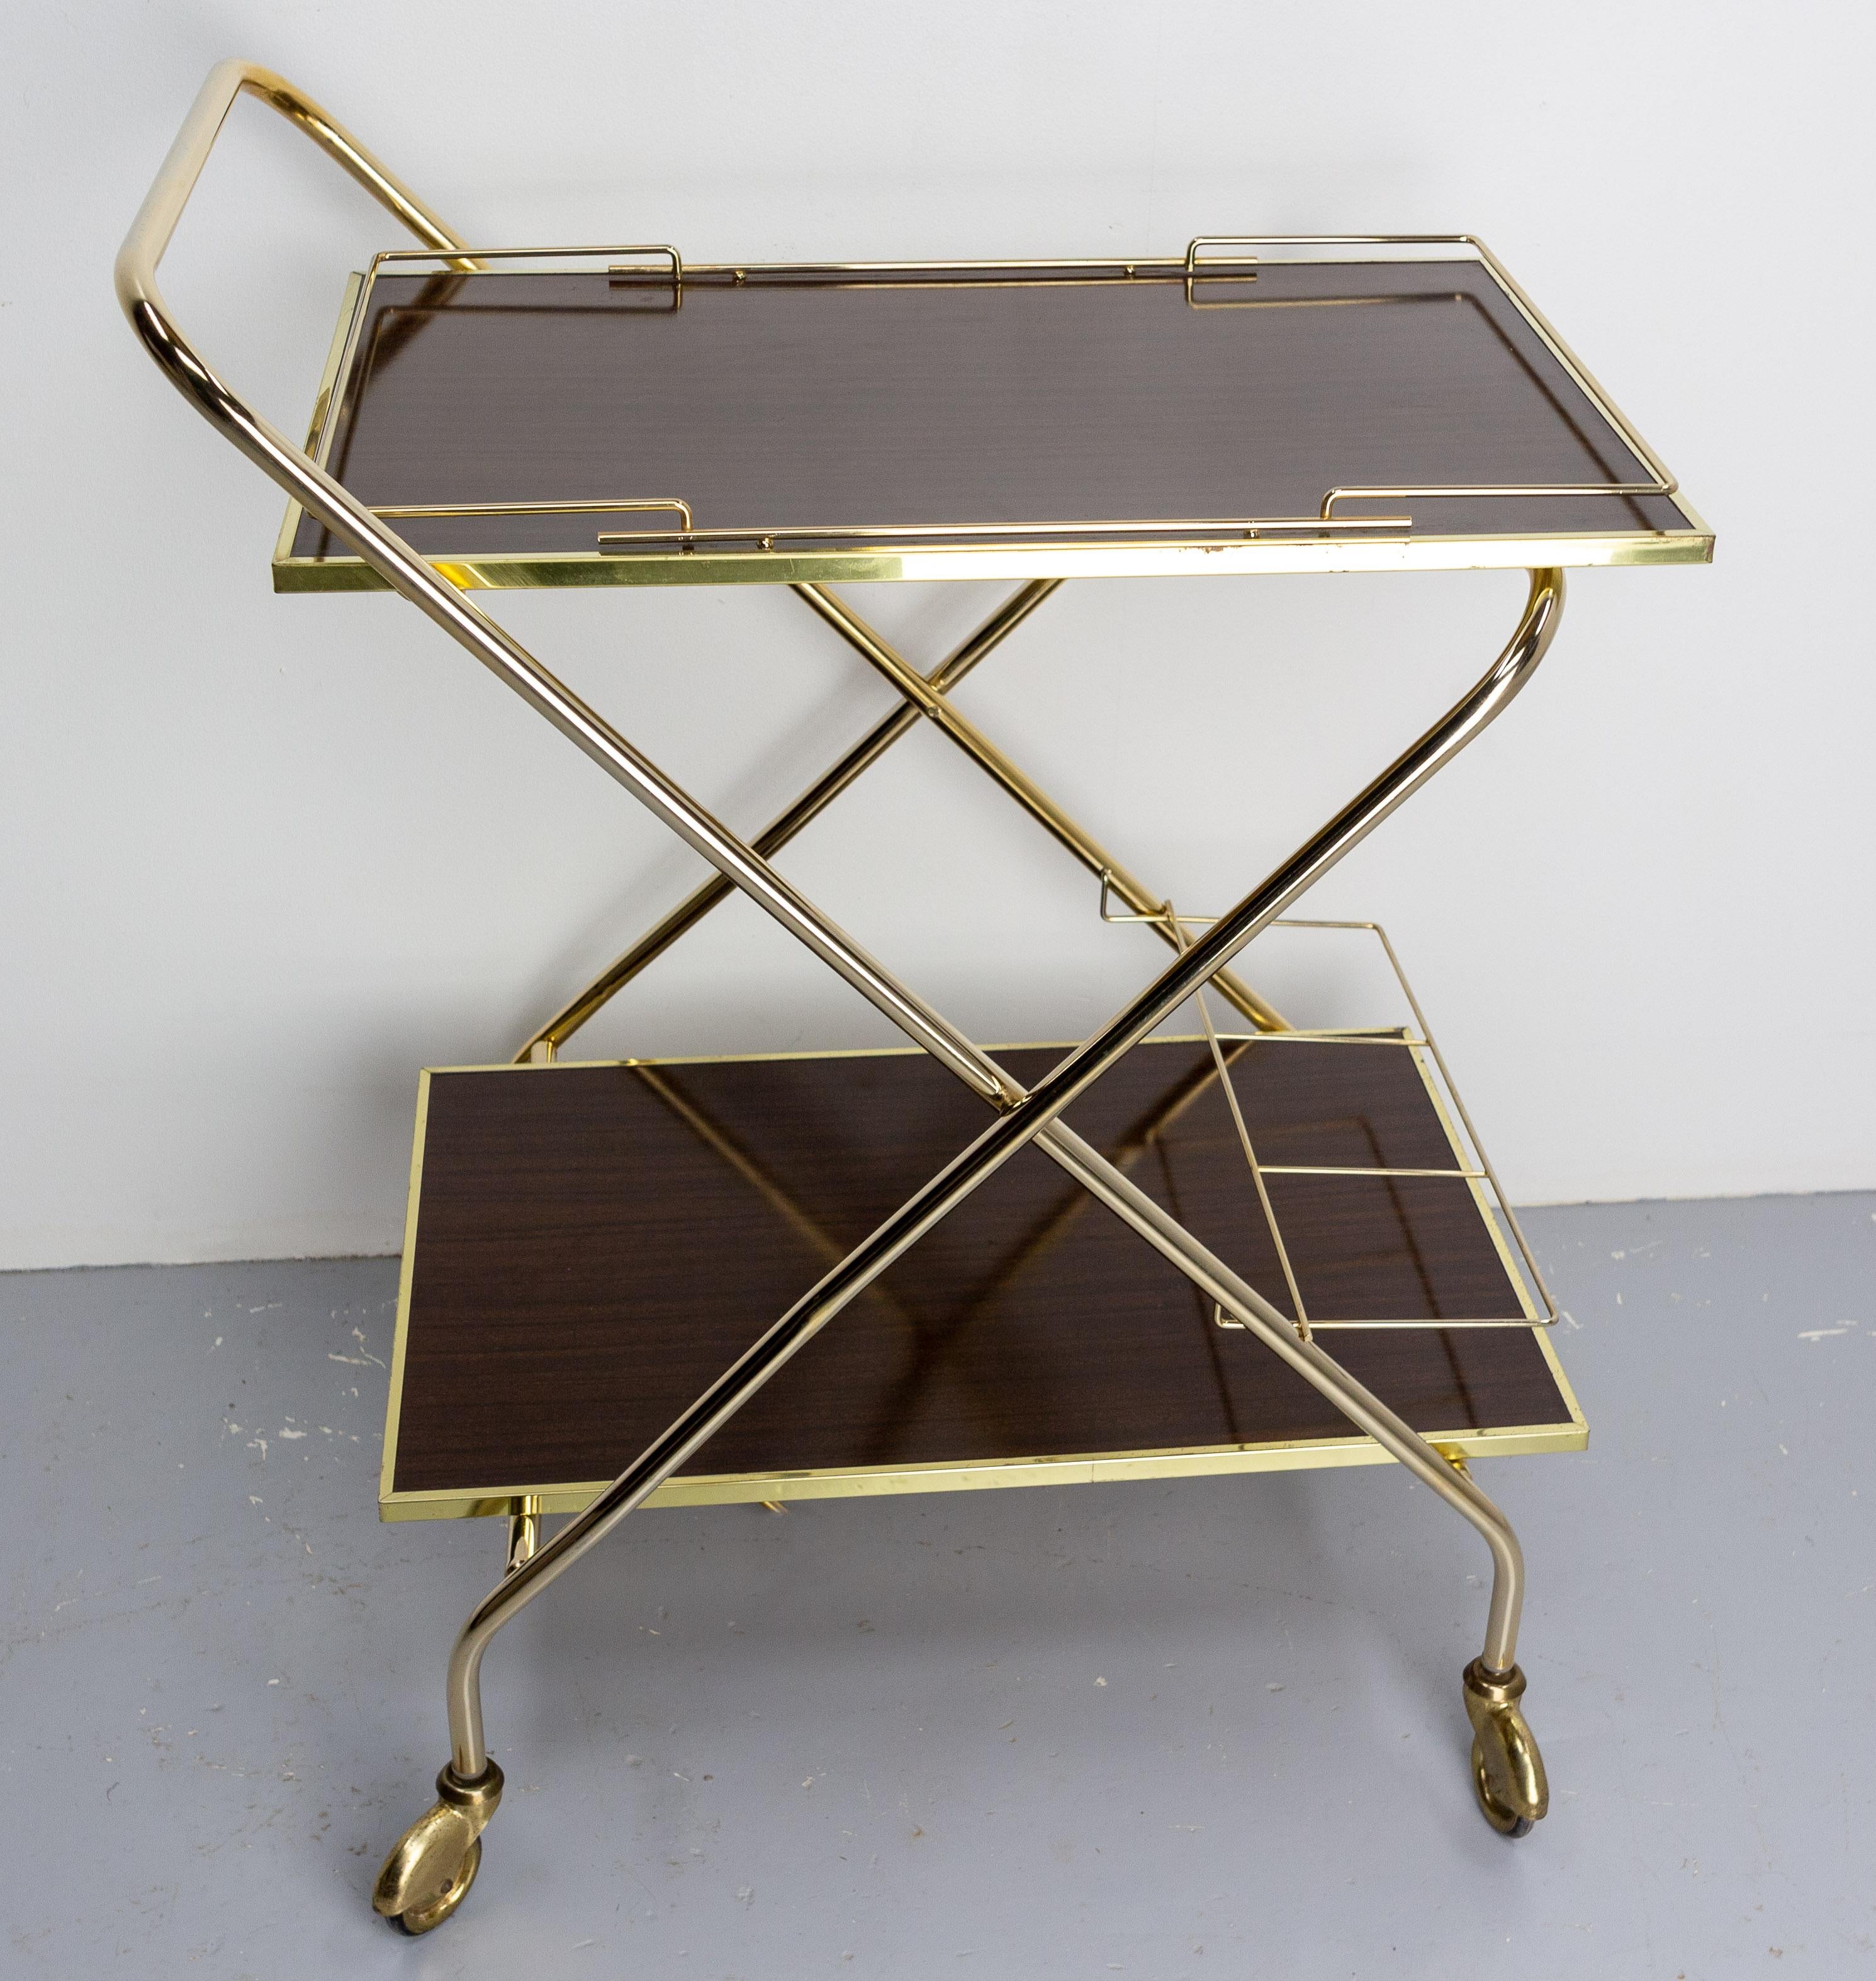 Dark wood laminate and golden chrome serving trolley folding bar cart drinks midcentury, august 1976
In good working order.
Easy to fold.
Very good vintage condition.

Measures when folded: D 19.68 in. / W 40.94 in. / H 7.48 in. (D 50 / W 104 /